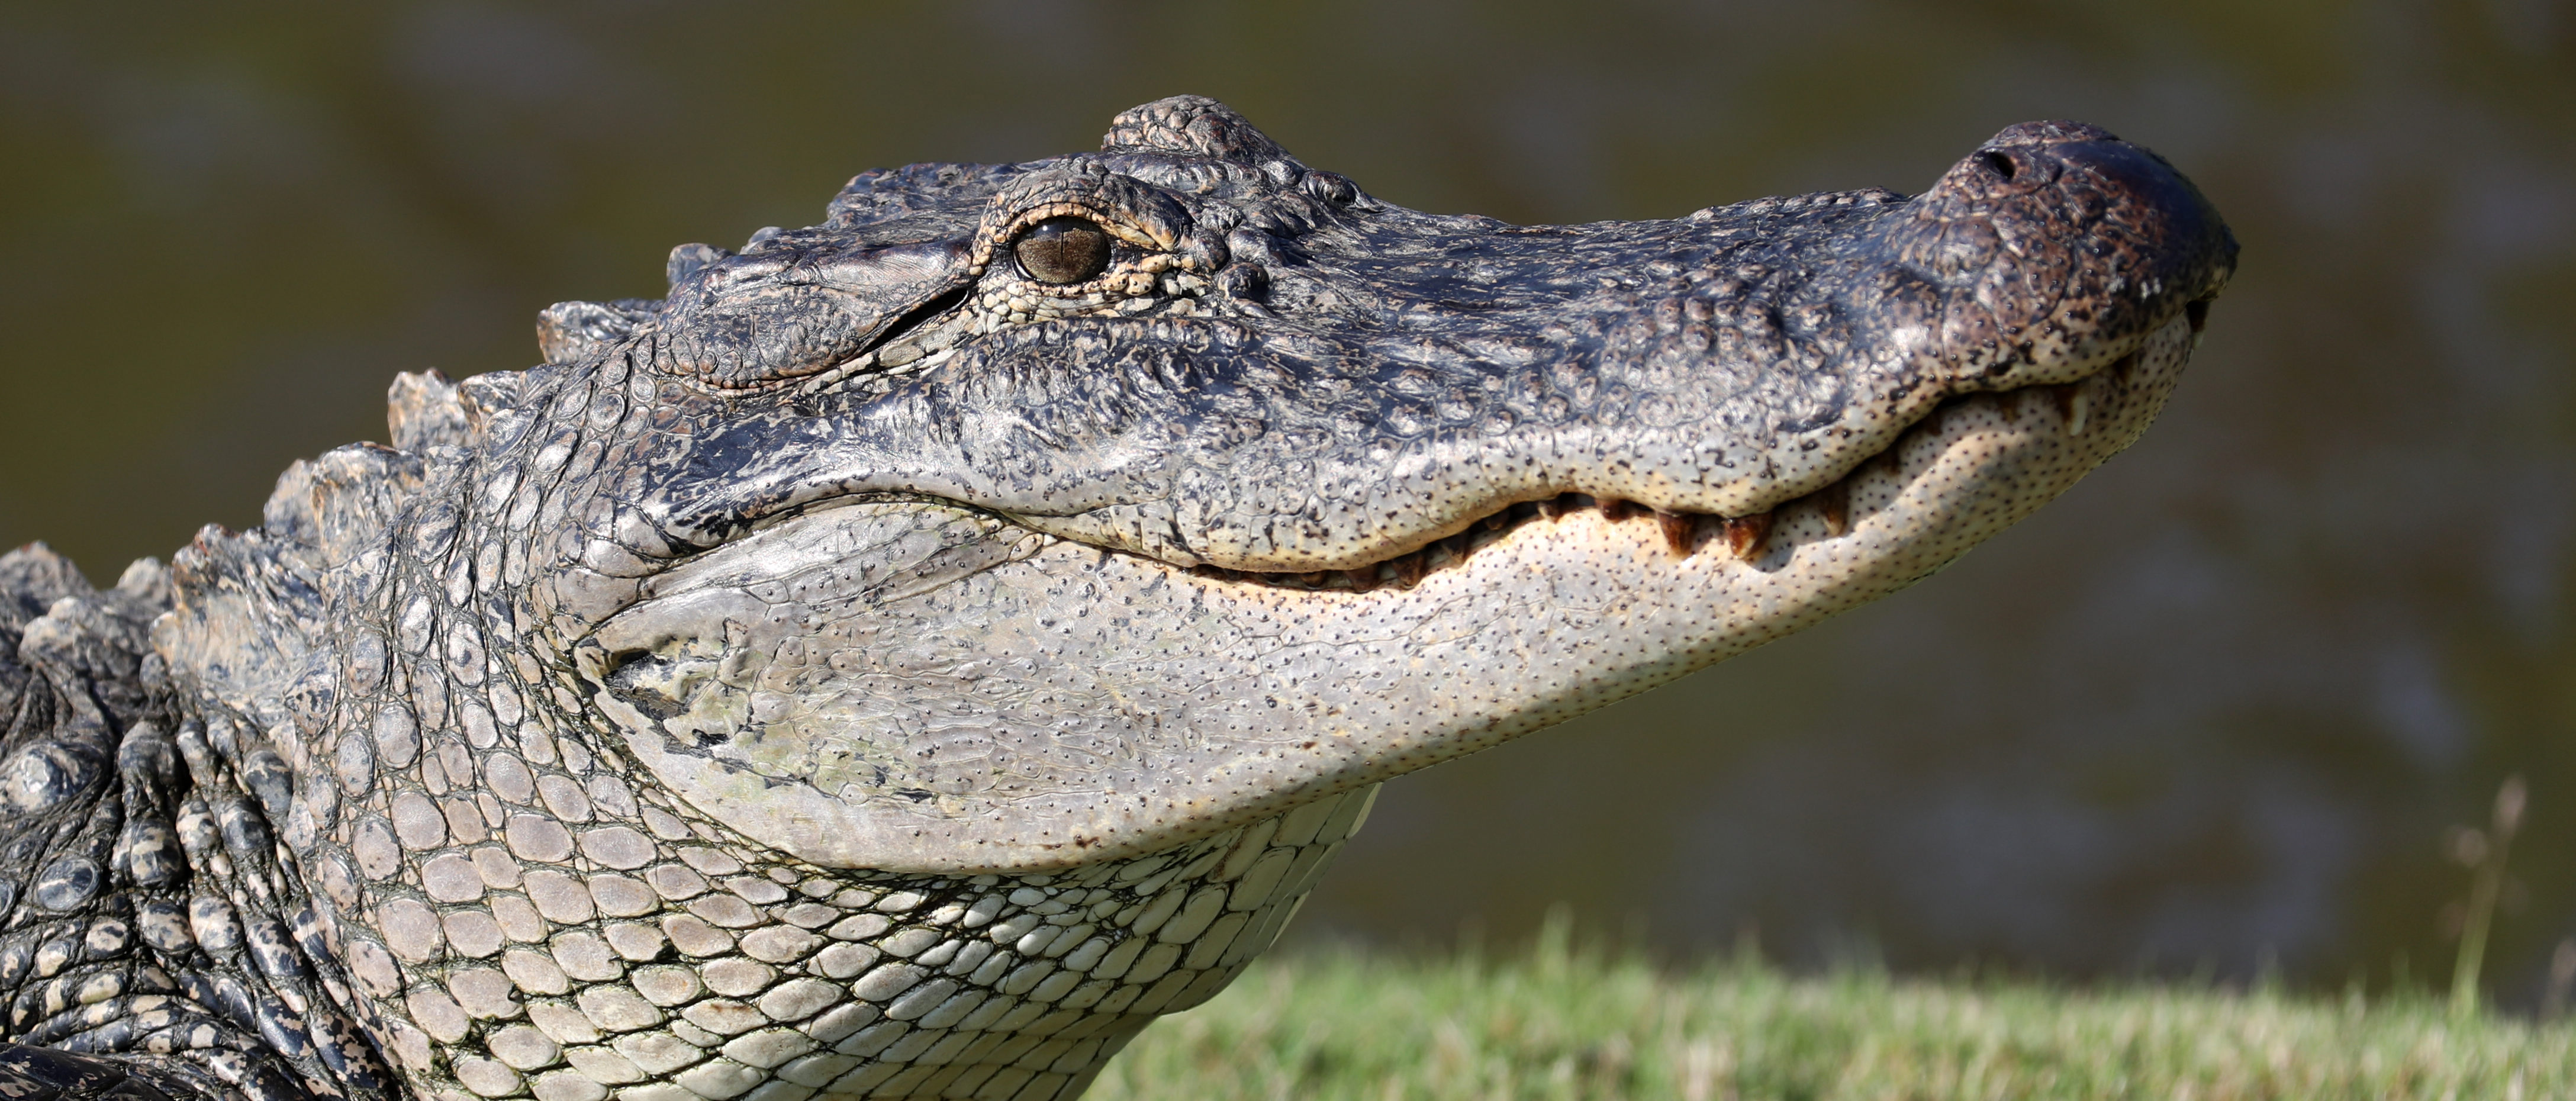 Woman Attacked By 9-Foot Alligator In Hilton Head, South Carolina | The ...